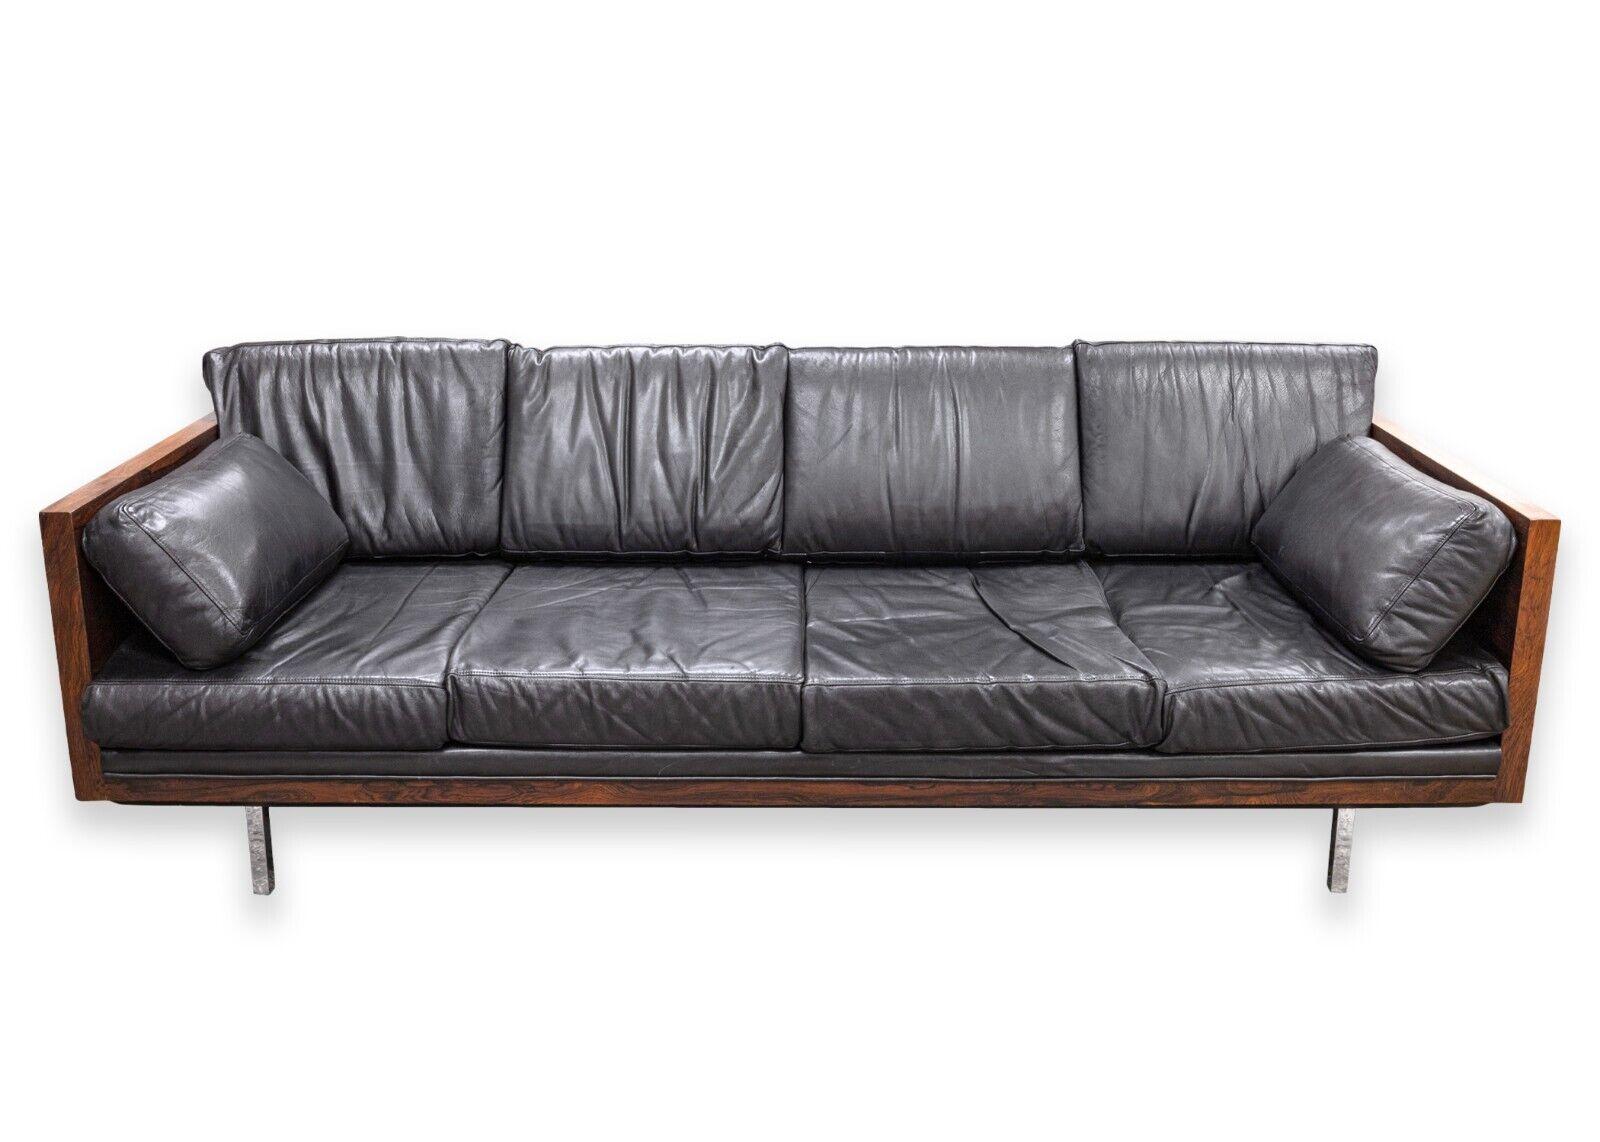 A Milo Baughman rosewood sofa. This is a magnificent mid century modern sofa with a luxurious design and set of materials. This piece features a rare rosewood frame, a soft black leather set of cushions, and shiny chrome legs. This piece is truly a